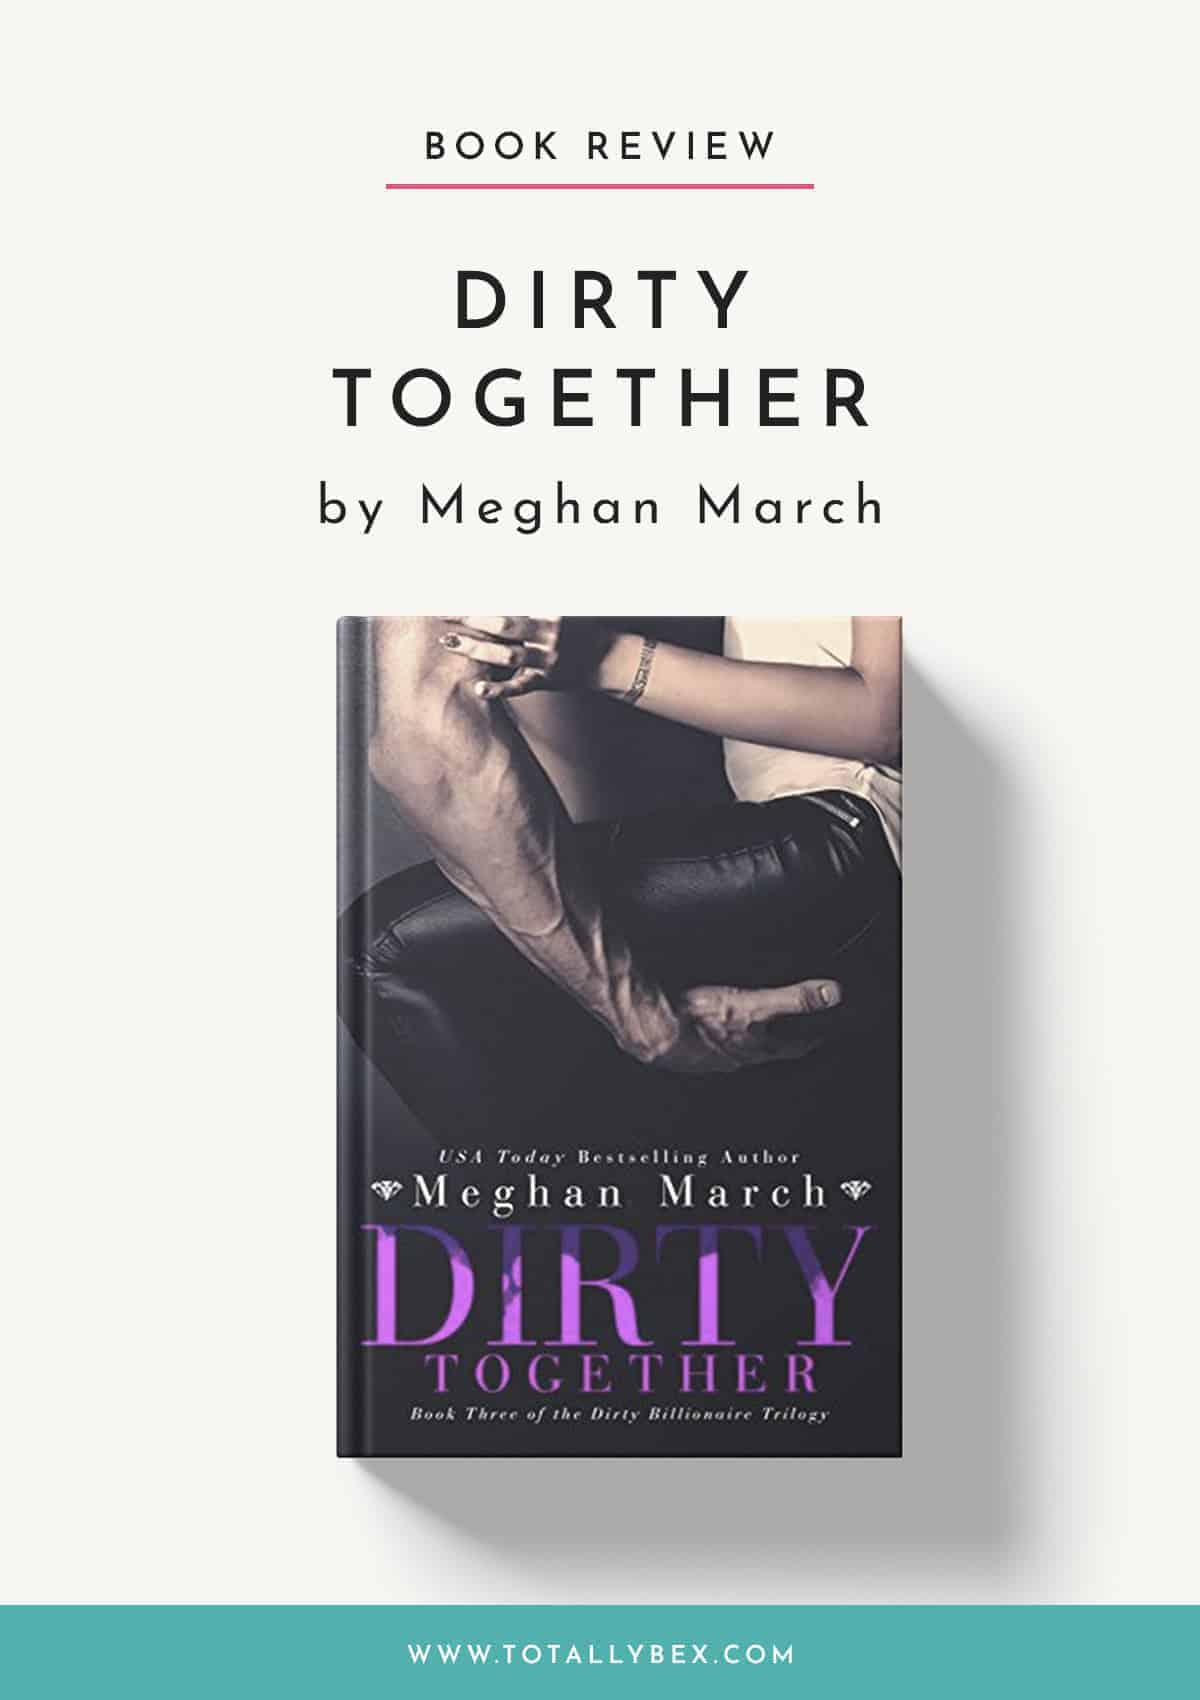 Dirty Together by Meghan March-Book Review